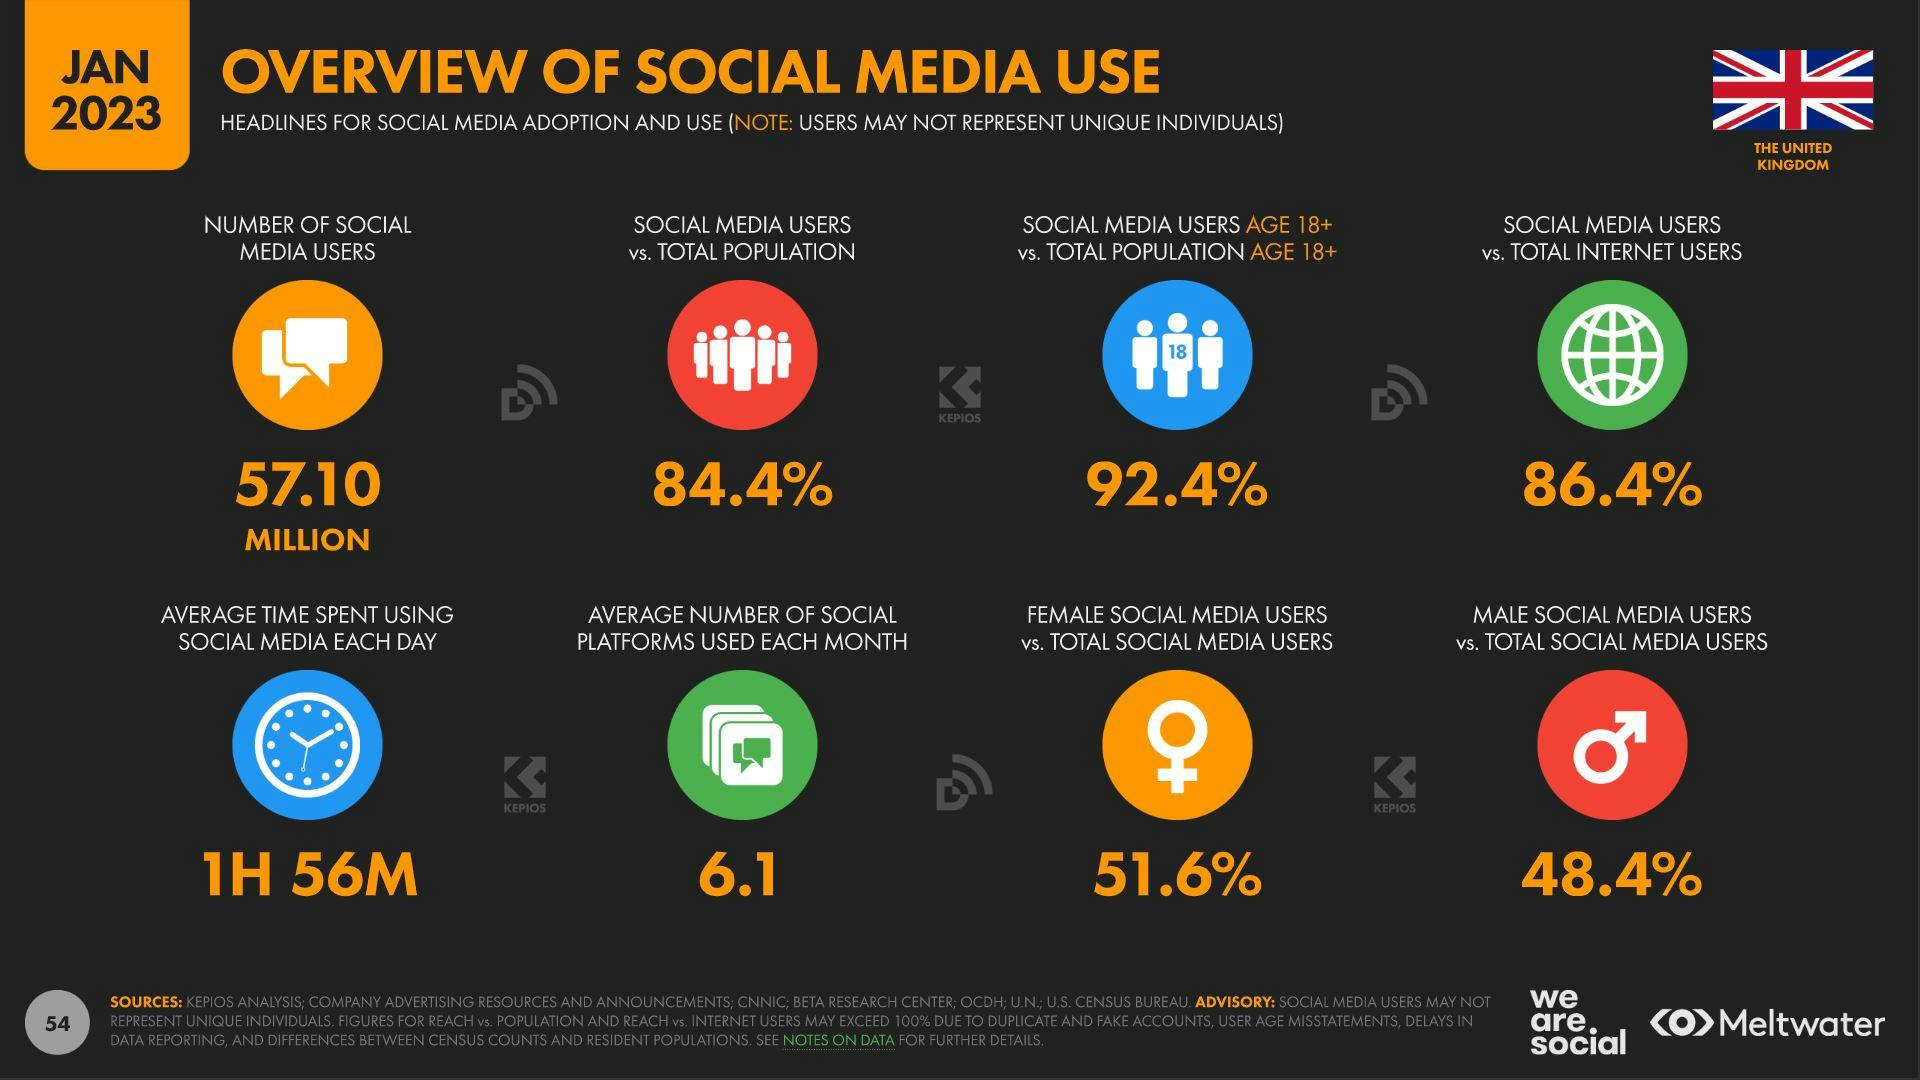 Overview of social media use for the UK